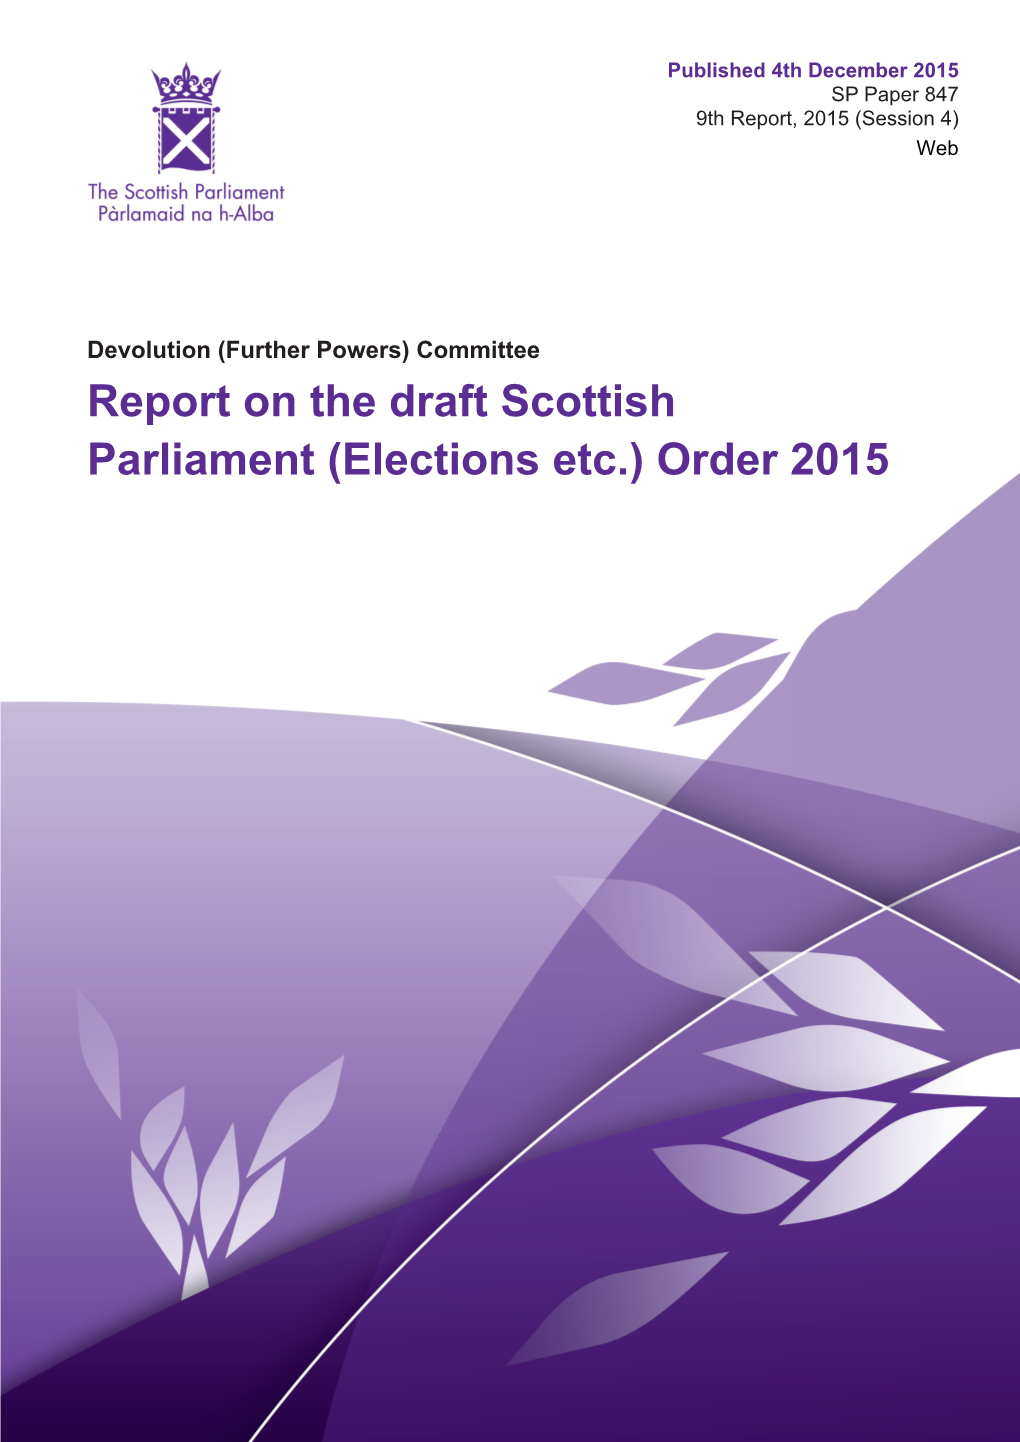 Report on the Draft Scottish Parliament (Elections Etc.) Order 2015